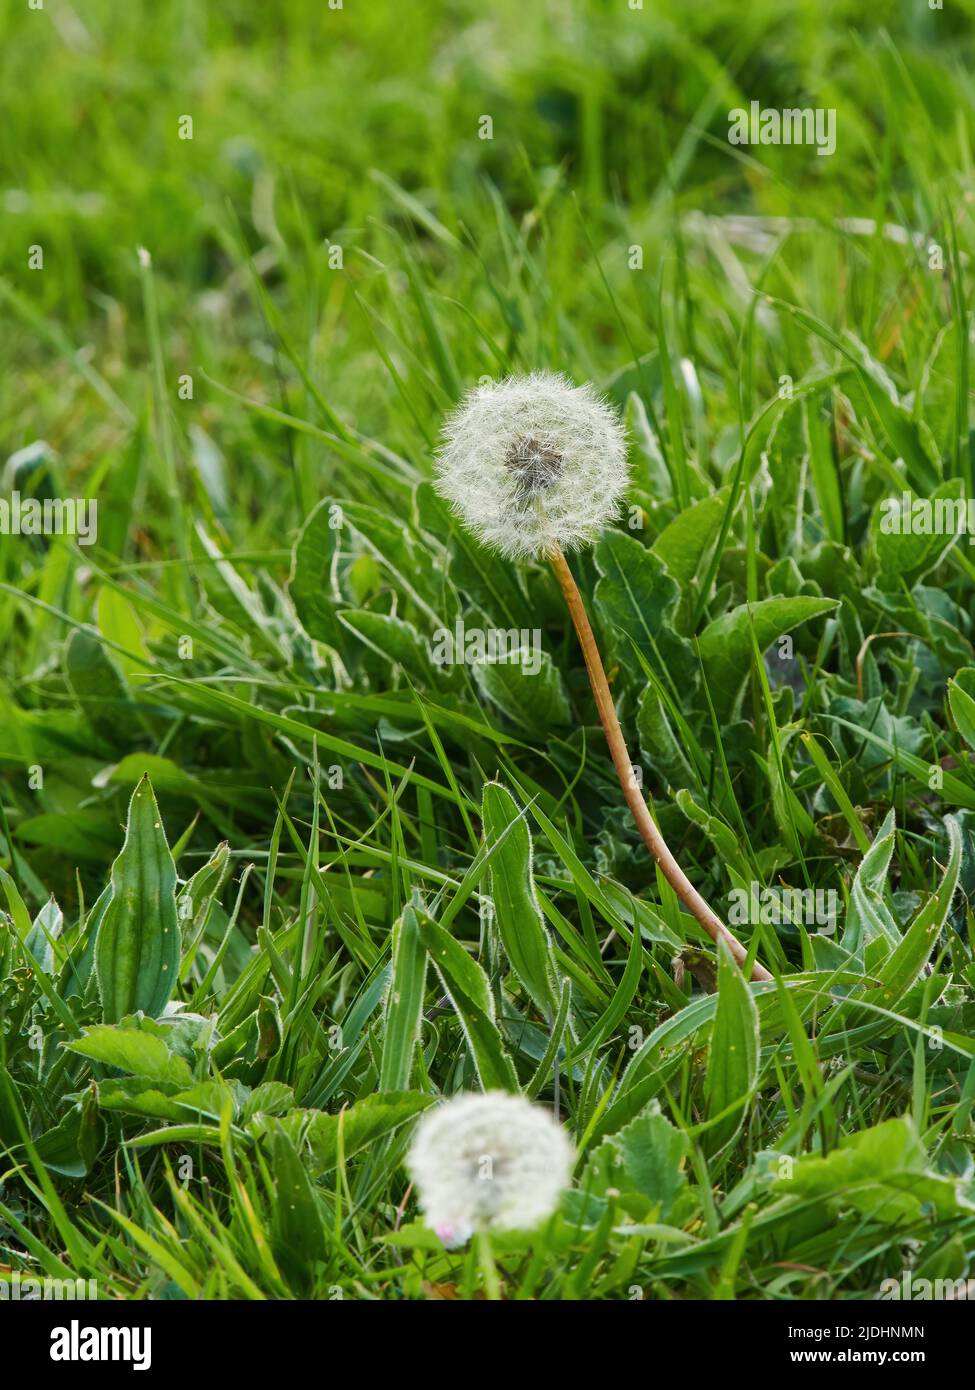 A pair of dandelion clocks, delicate and fragile and fluffy, amongst the greenery of blades of grass and the plants of the undergrowth. Stock Photo